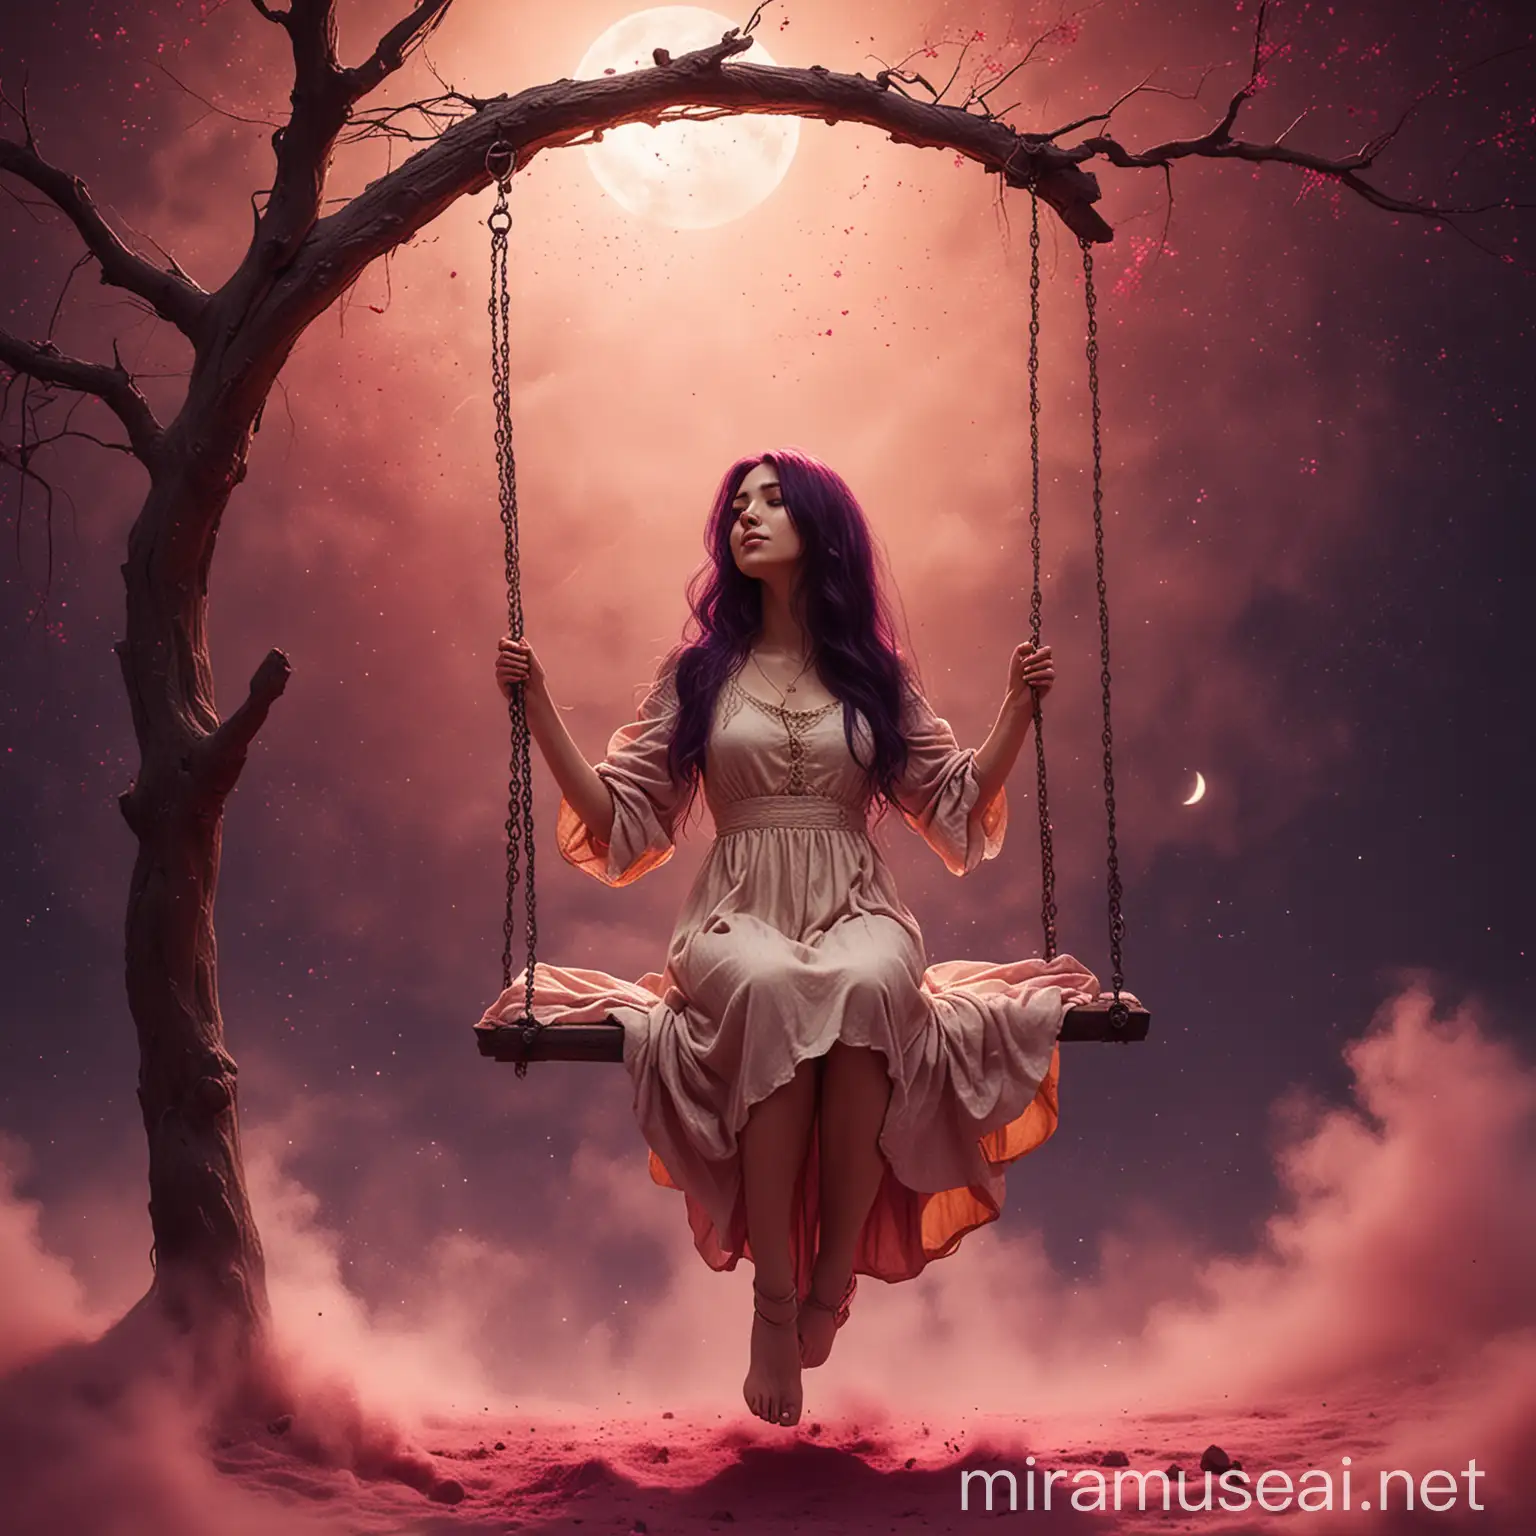 A beauriful woman, sitting on a swing, in the sky, surrounded by realistic dark pink dust. Long dark pyrple hair, long beige dres. Background lightening golden moon. Fantasy, illustration, digital art, illustration art, fantasy art, digital painting